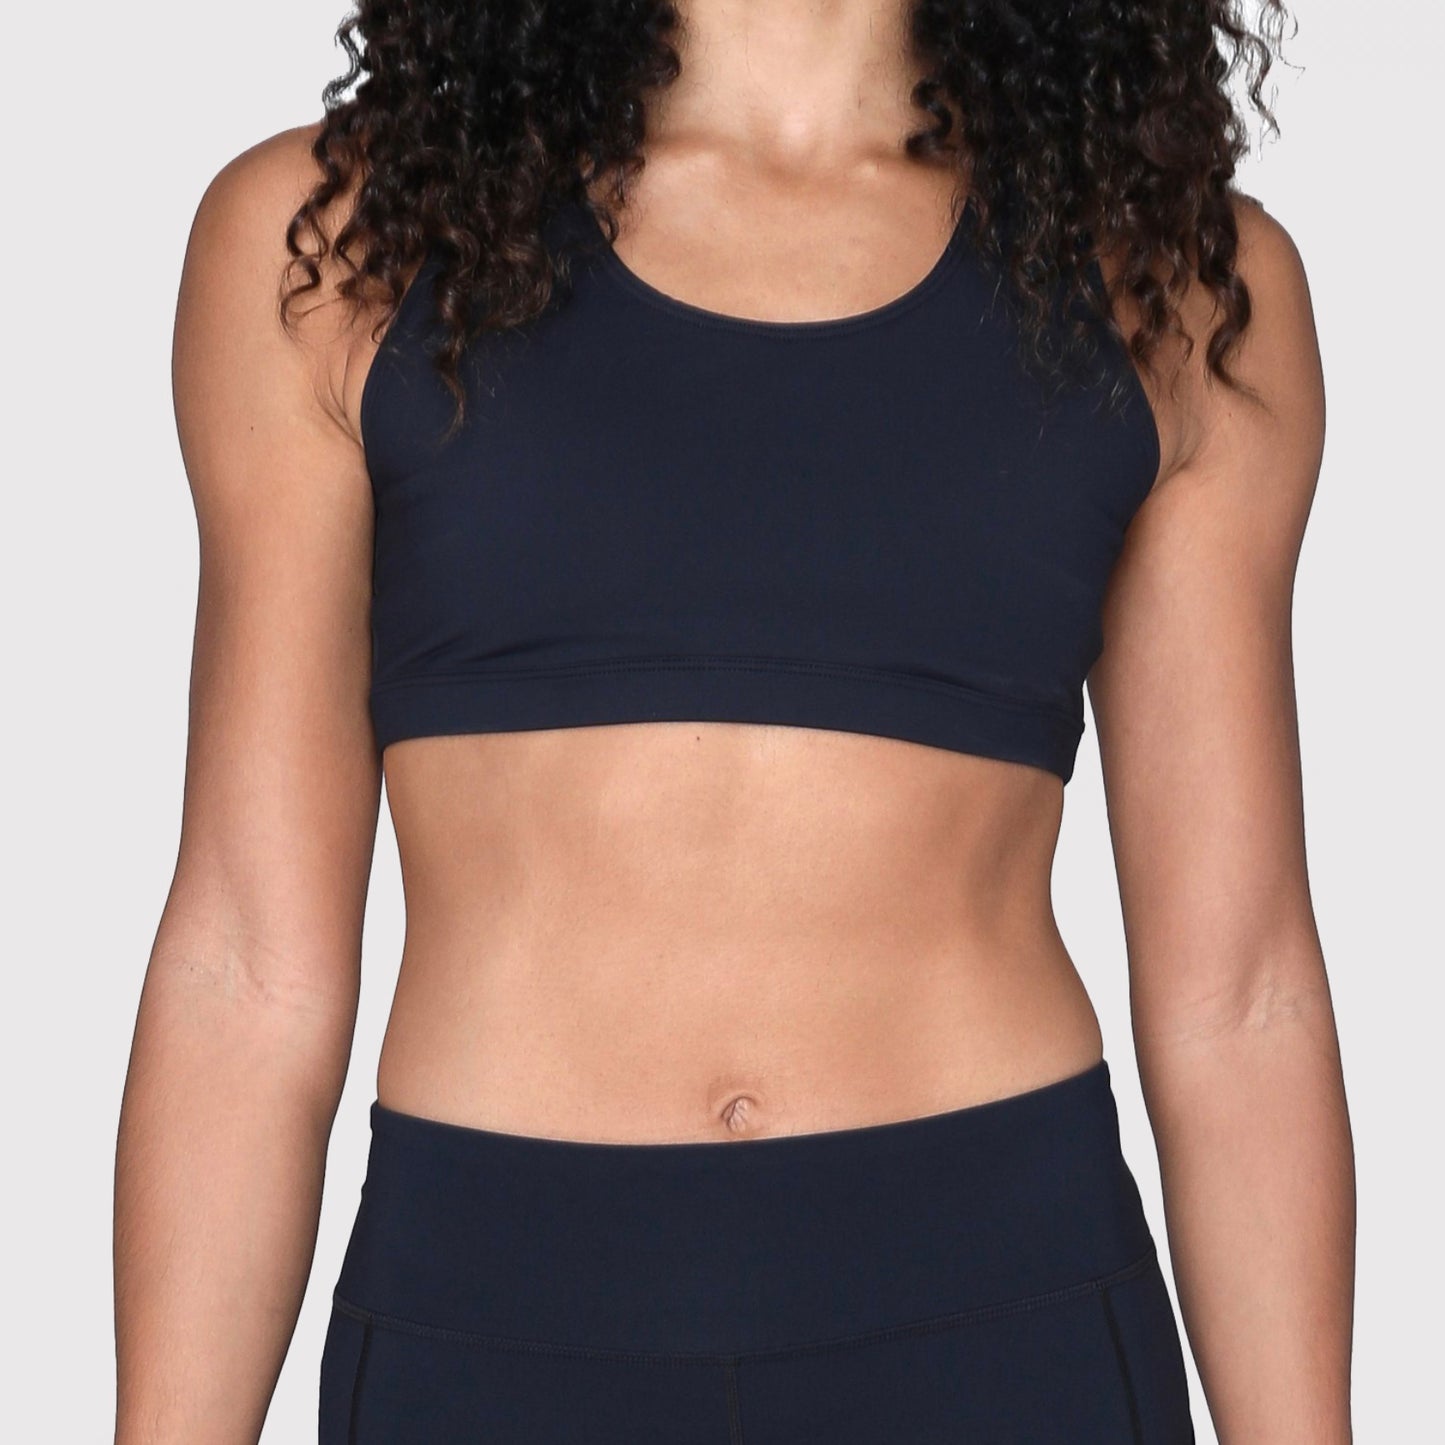 Savvy Compression Fit Sports Bras for Women